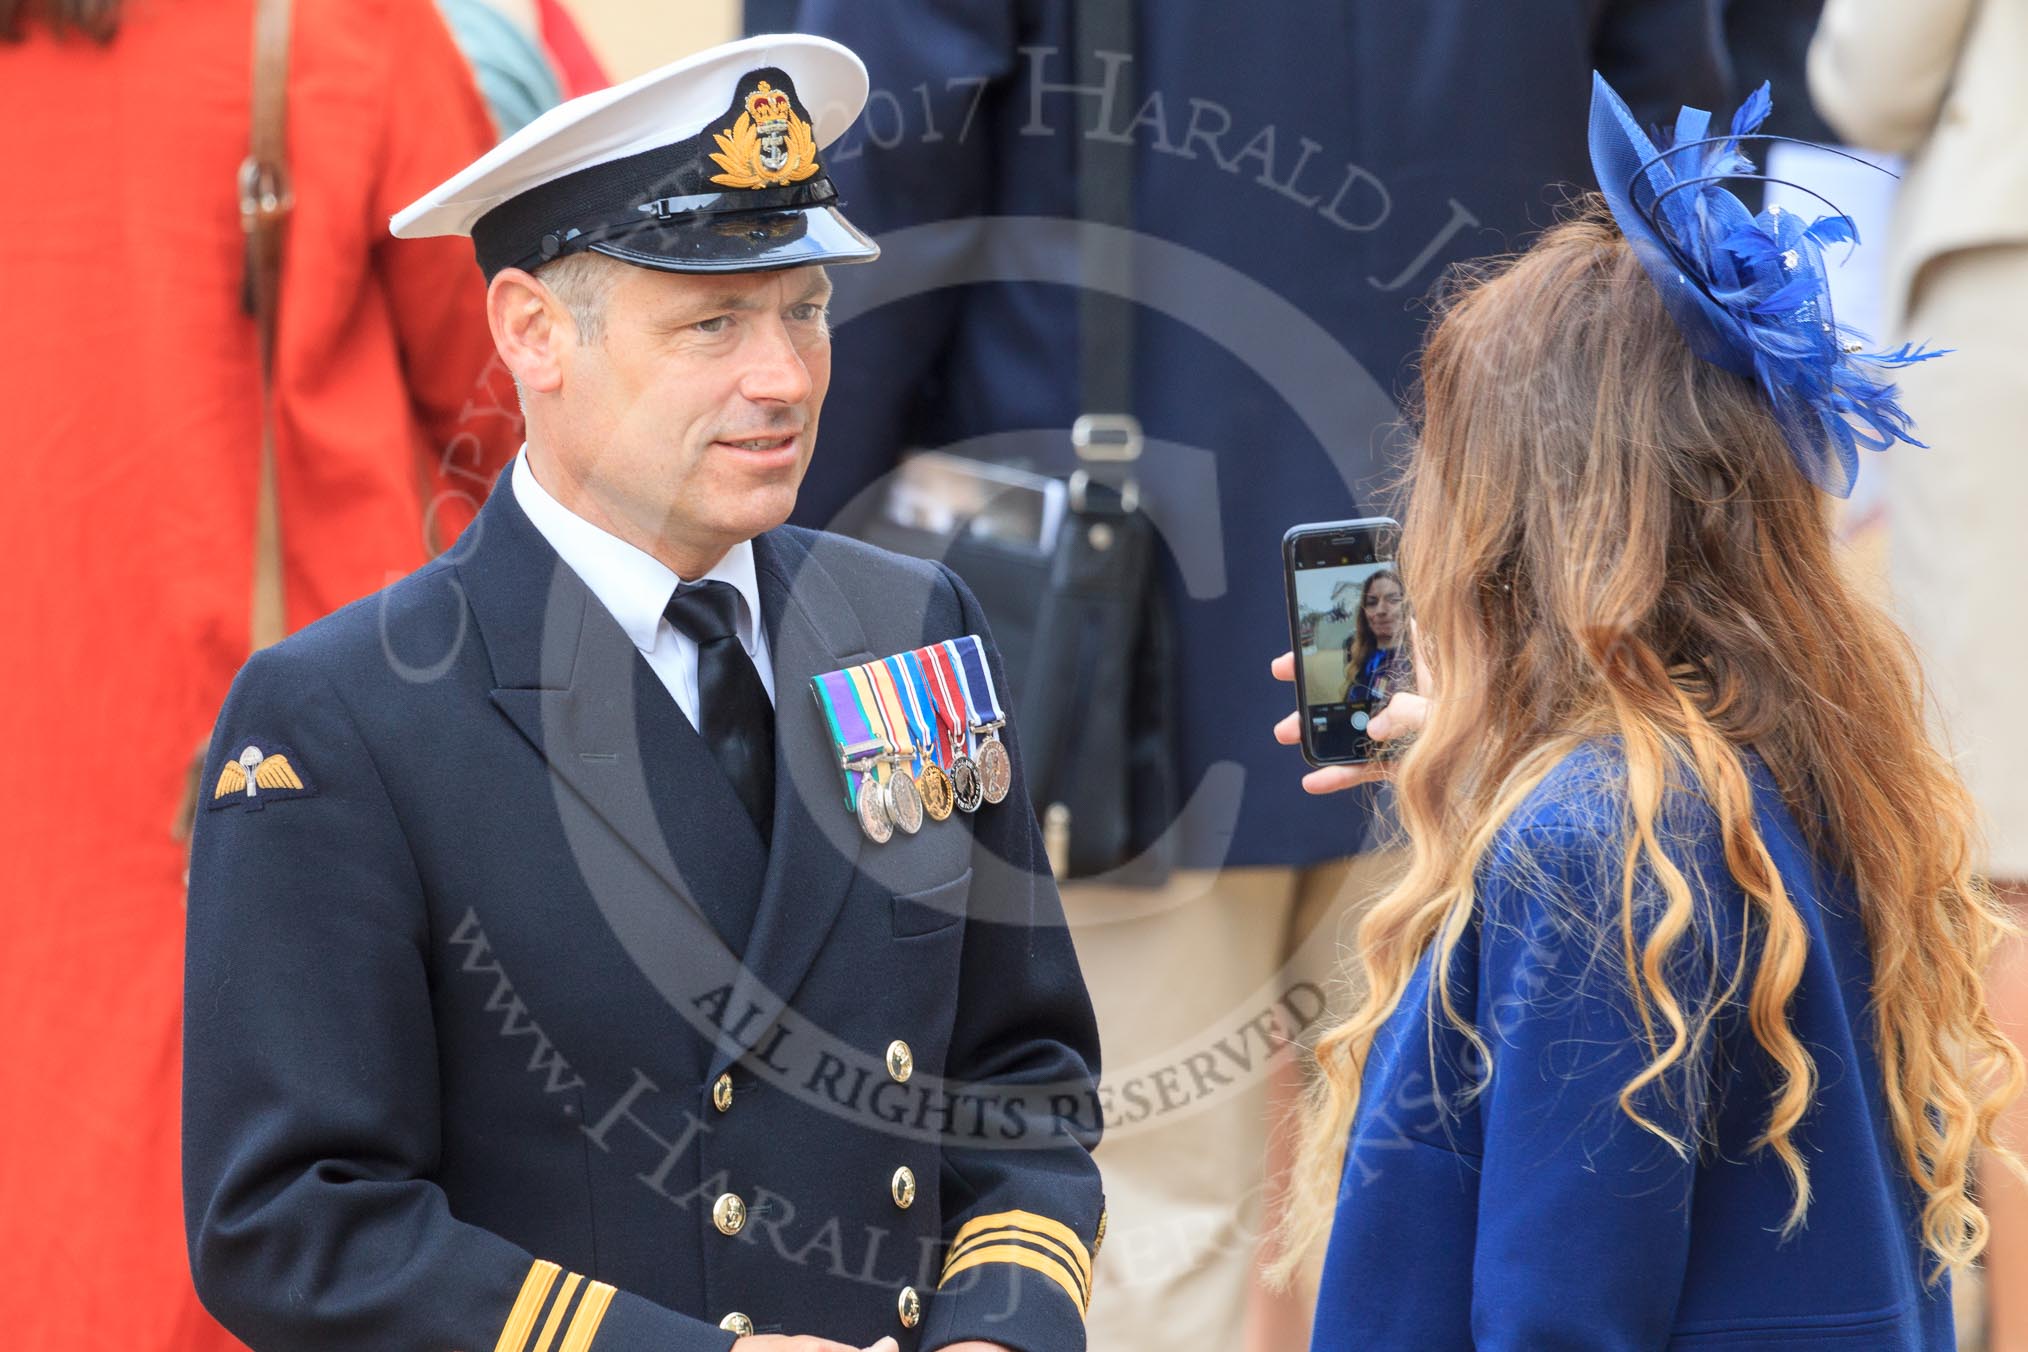 A Royal Navy Lieutenant Commander at Trooping the Colour 2018, The Queen's Birthday Parade at Horse Guards Parade, Westminster, London, 9 June 2018, 09:32.